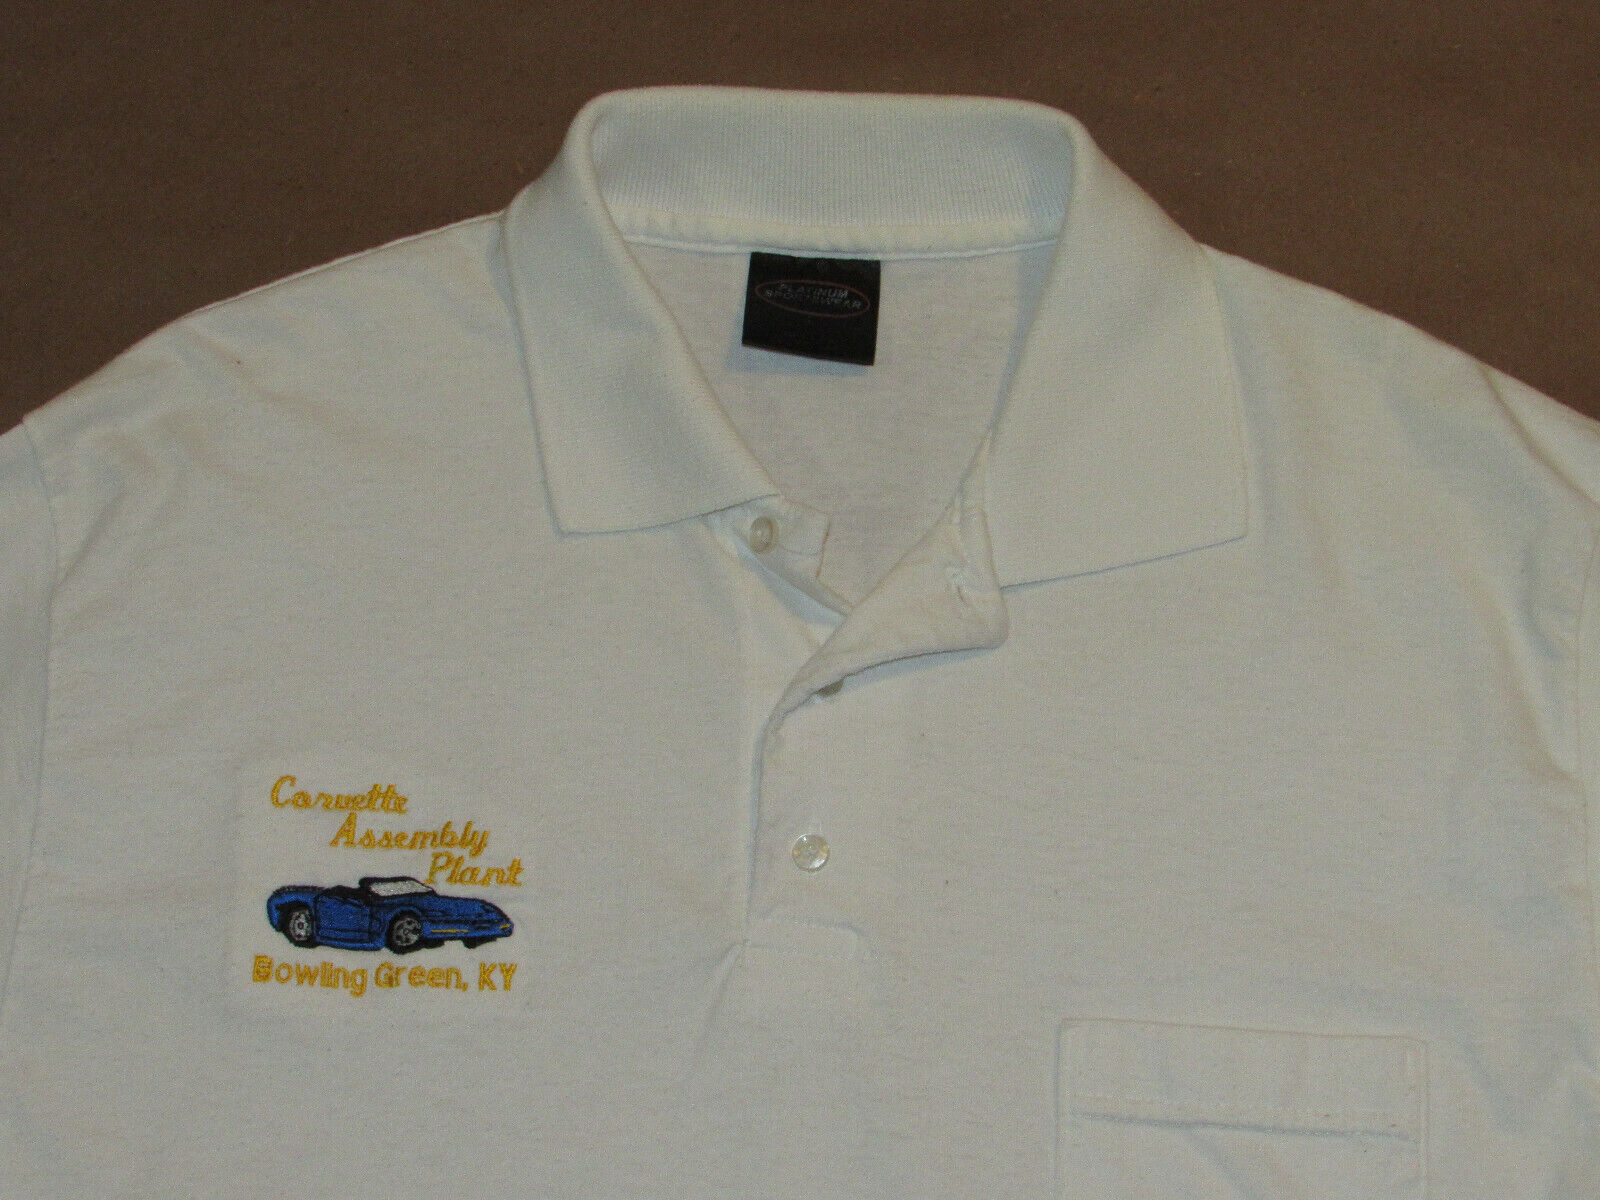 CORVETTE ASSEMBLY PLANT, BOWLING GREEN, KY POLO SHIRT EMBROIDERED POCKET L